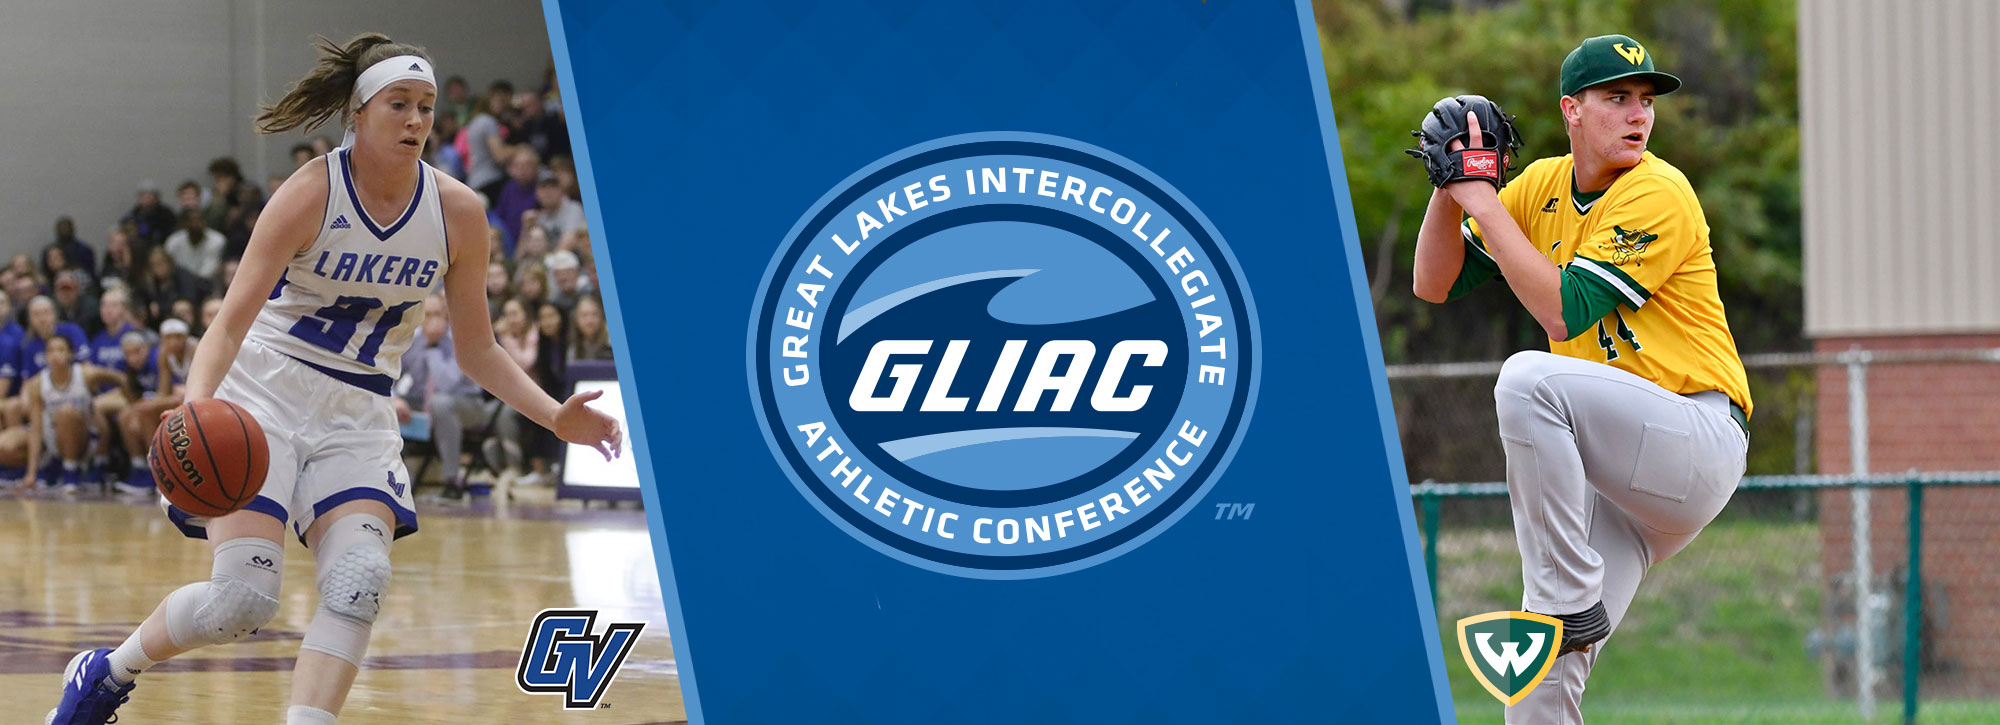 Grand Valley State's Boensch, Wayne State's Brown Named 2018-19 GLIAC Scholar-Athletes of the Year